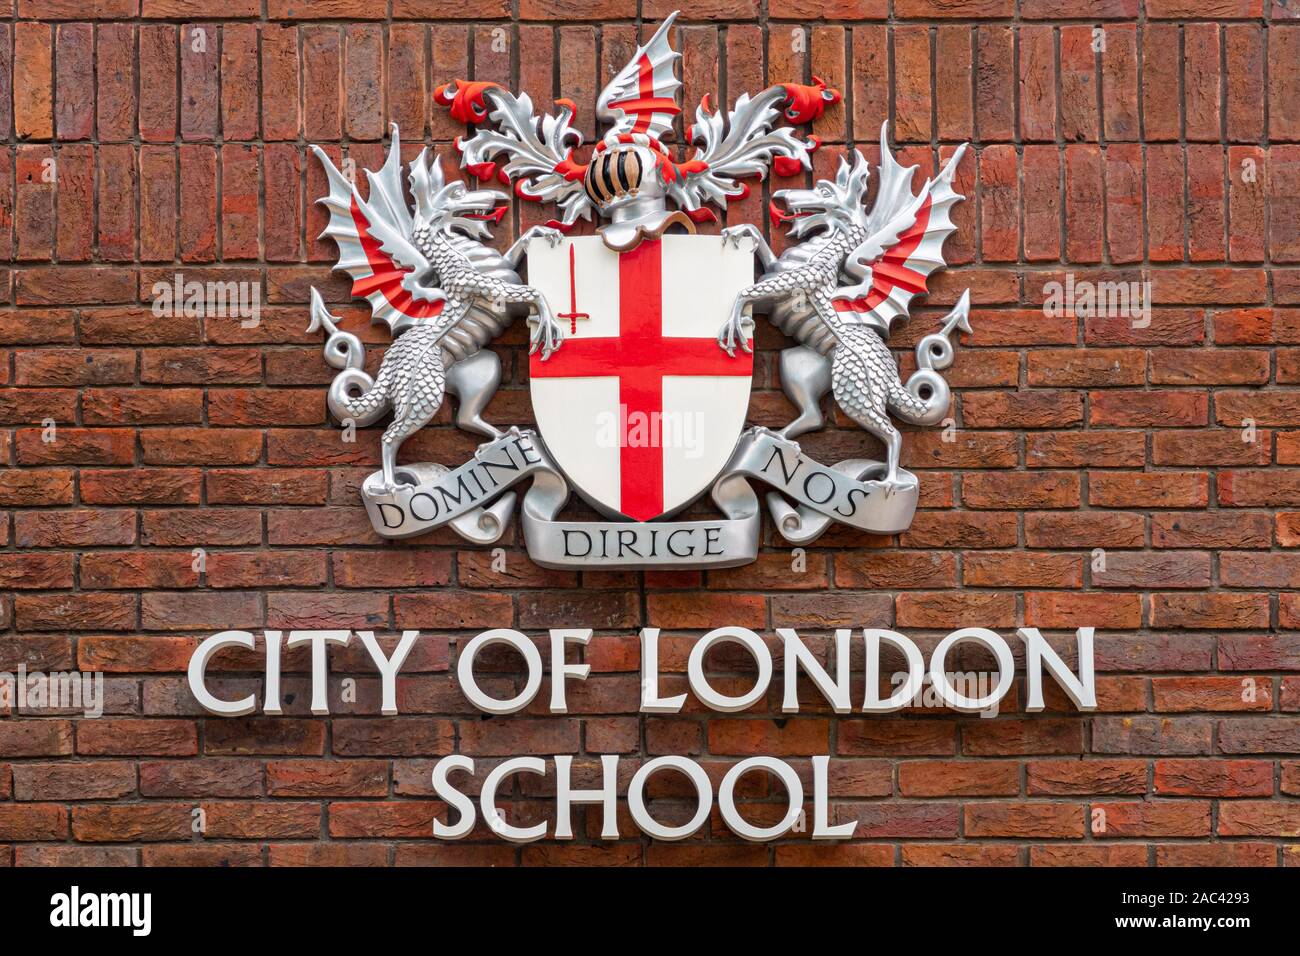 LONDON, UK - AUGUST 10, 2017: The coat of arms of the City of London School on a brick facade in London. Stock Photo